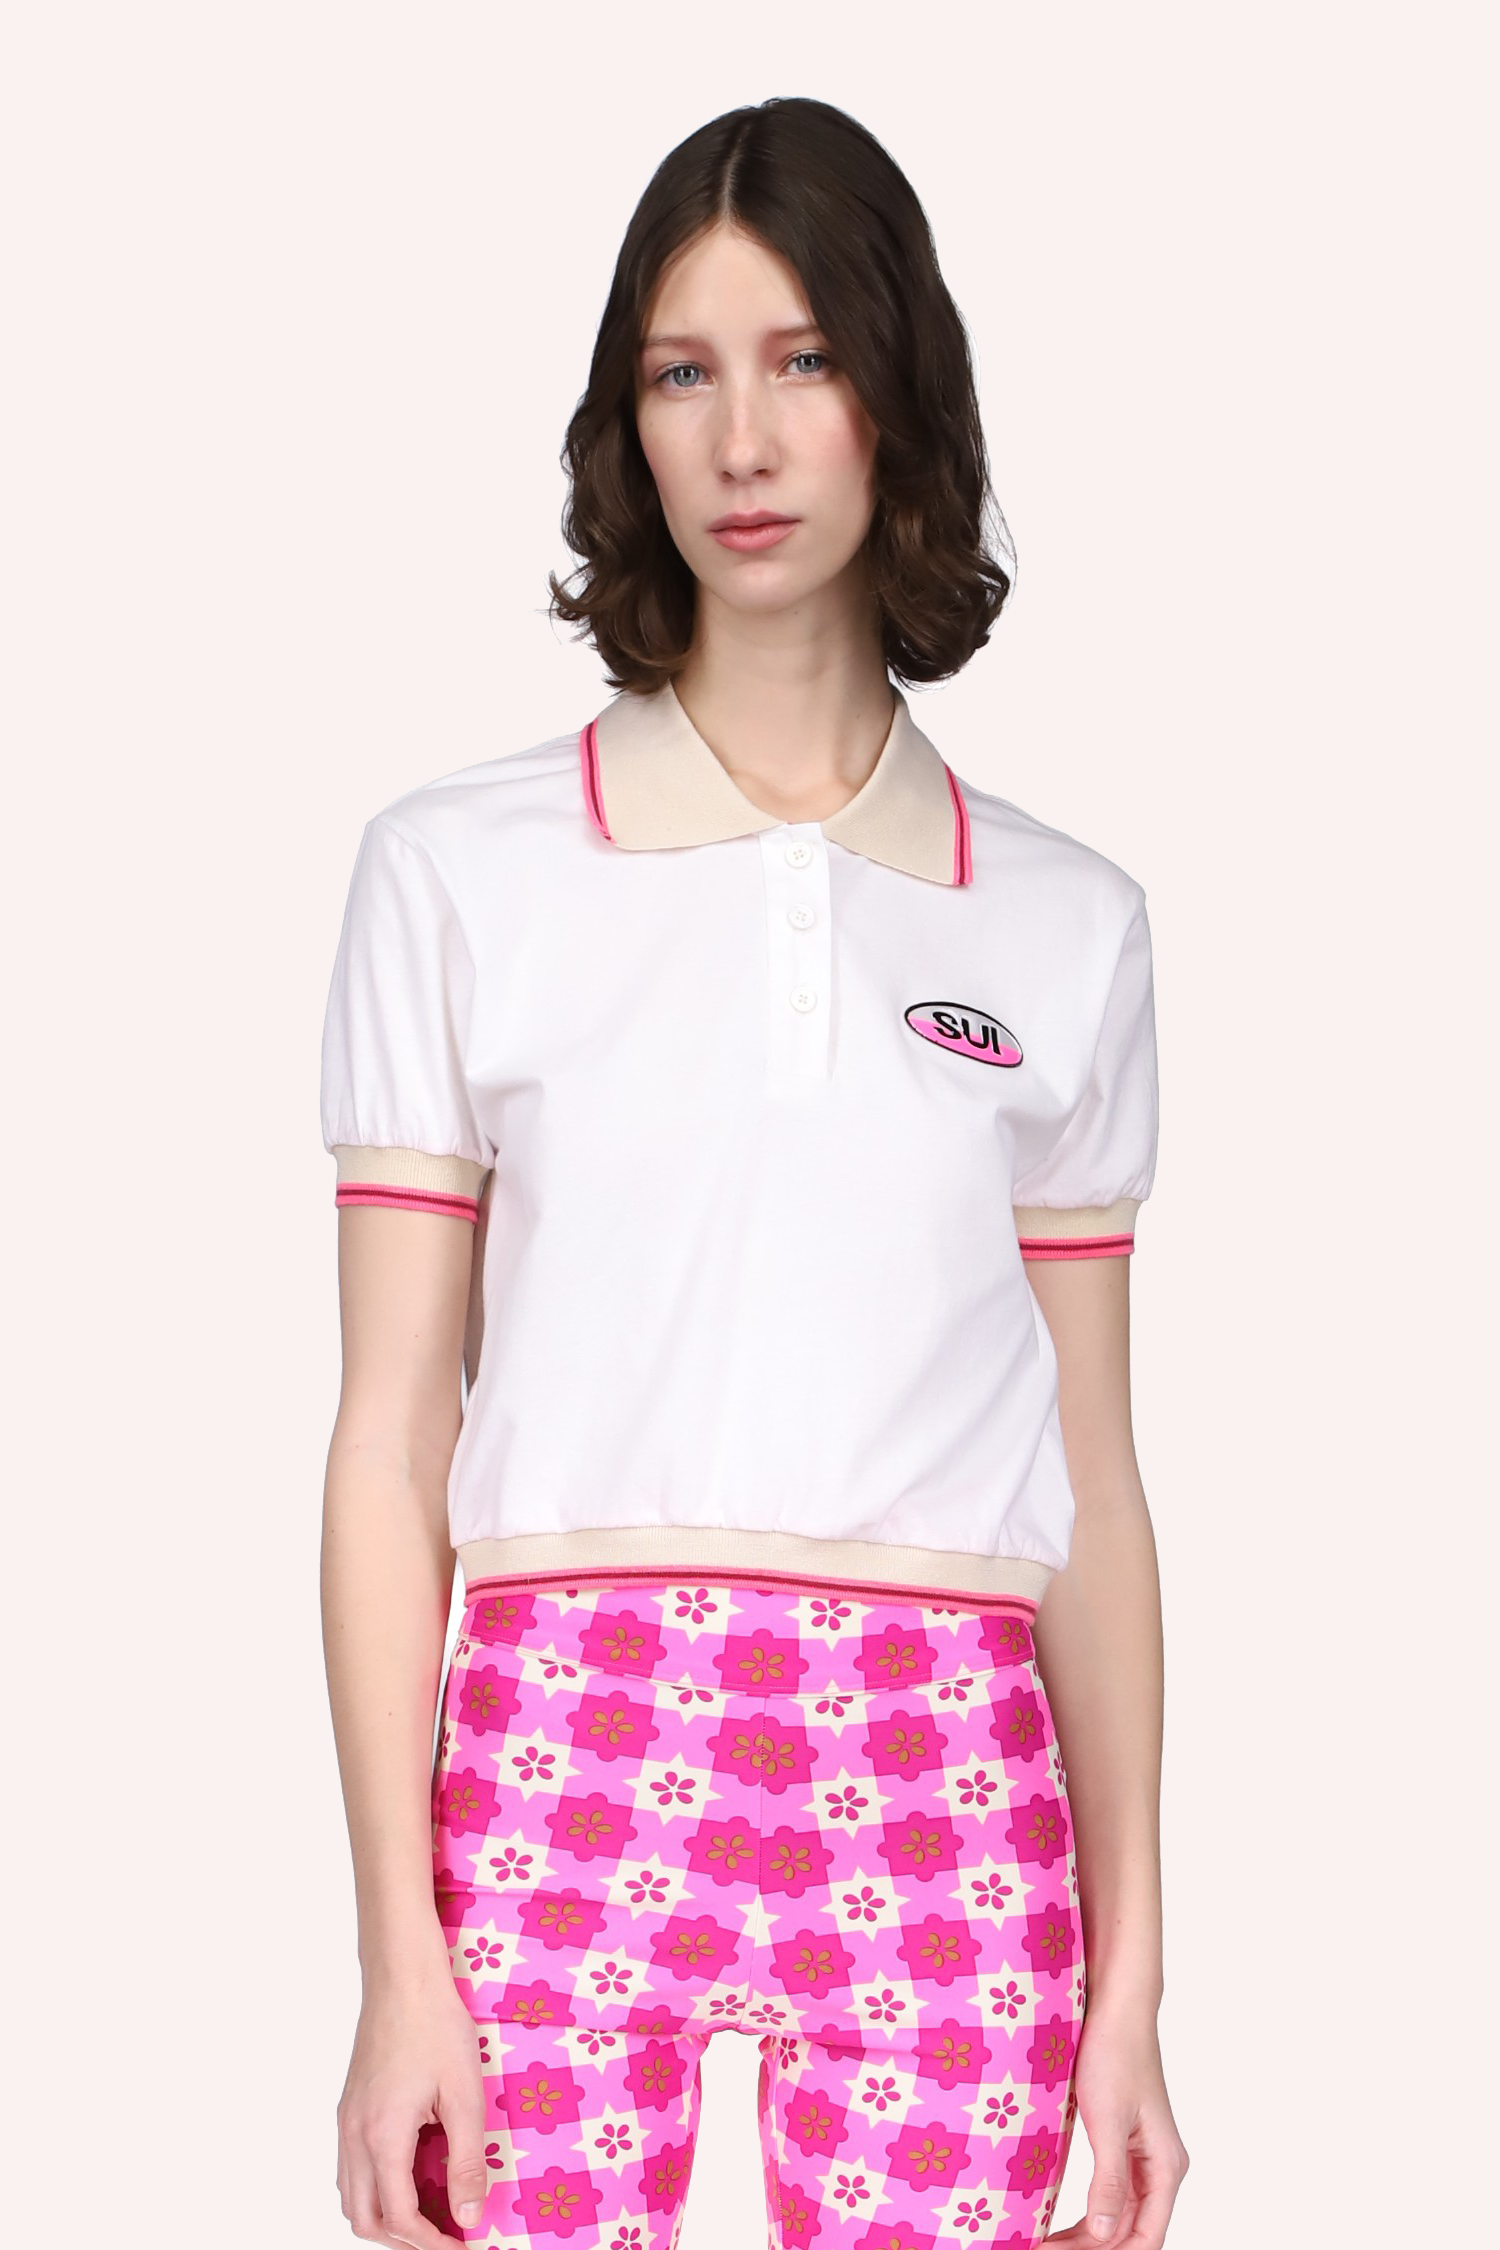 Deco Polo Top Neon Pink, white tee, seams with beige and pink lines, SUI a label on the left